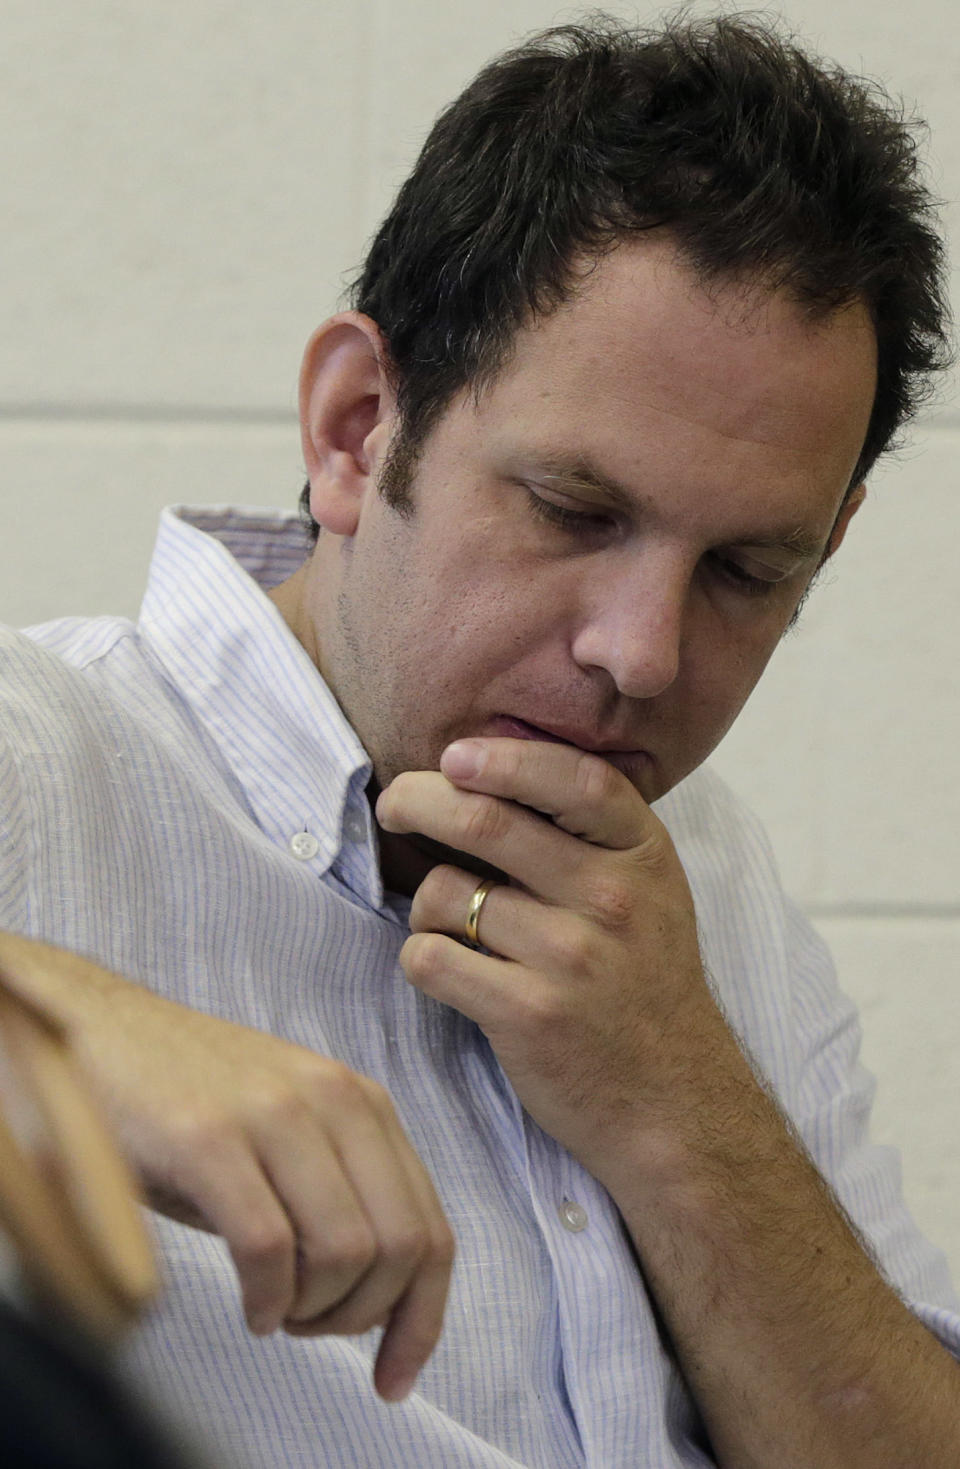 Composer Yotam Haber attends a rehearsal for his civil rights symphony "A More Convenient Season" in Birmingham, Ala., Saturday, Sept. 7, 2013. (AP Photo/Dave Martin)